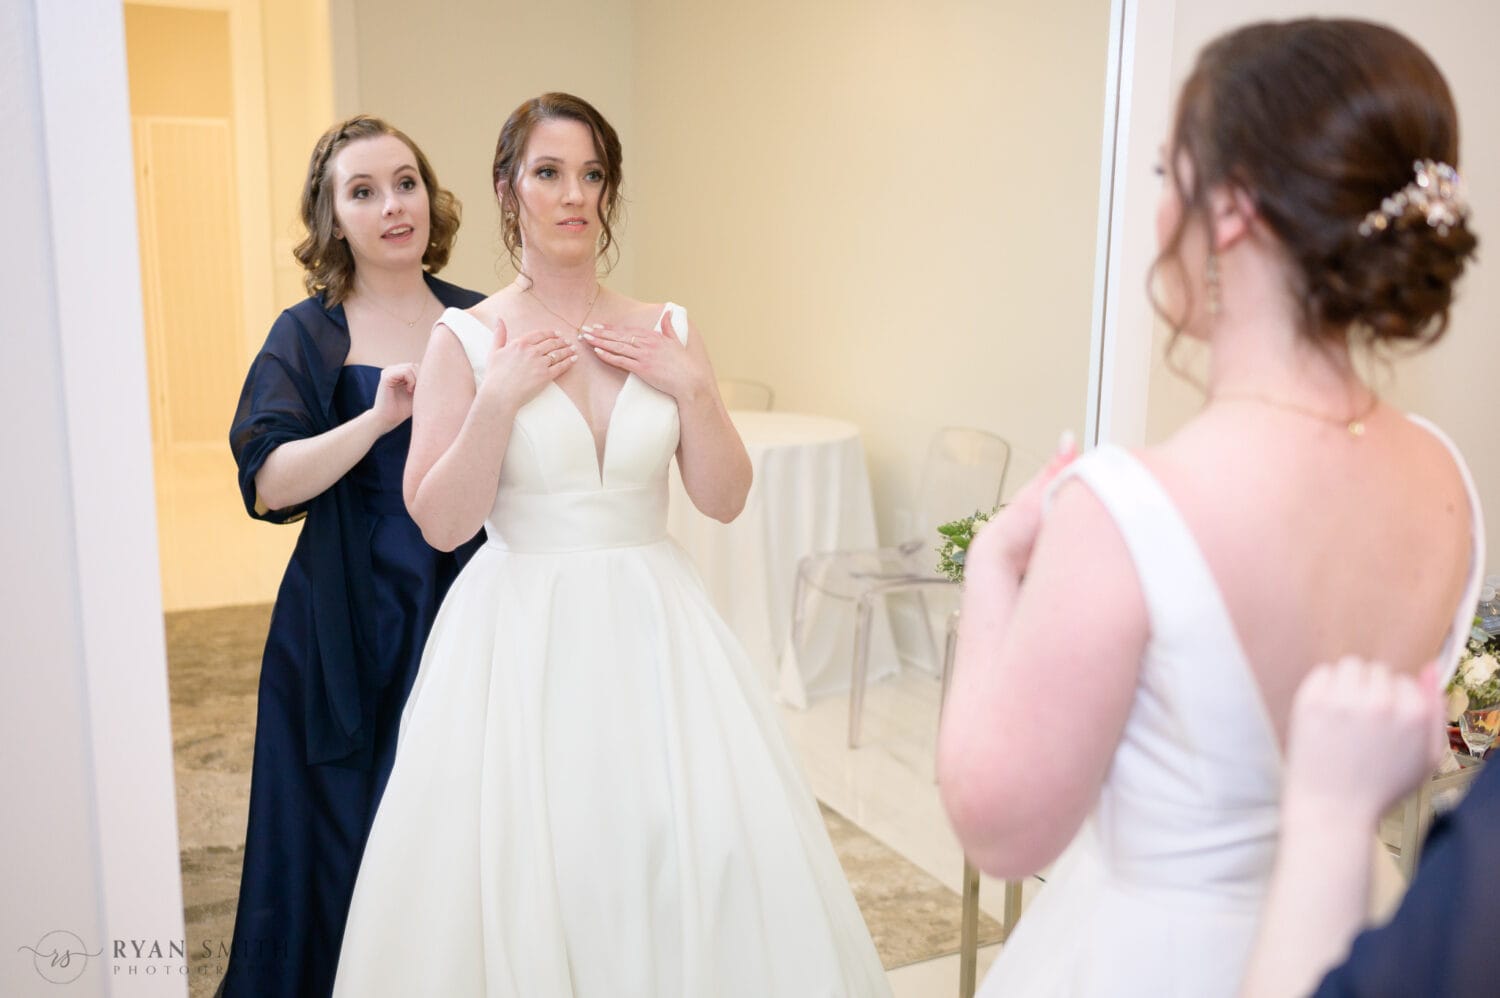 Groom's daughter helping bride get ready - 21 Main Events at North Beach